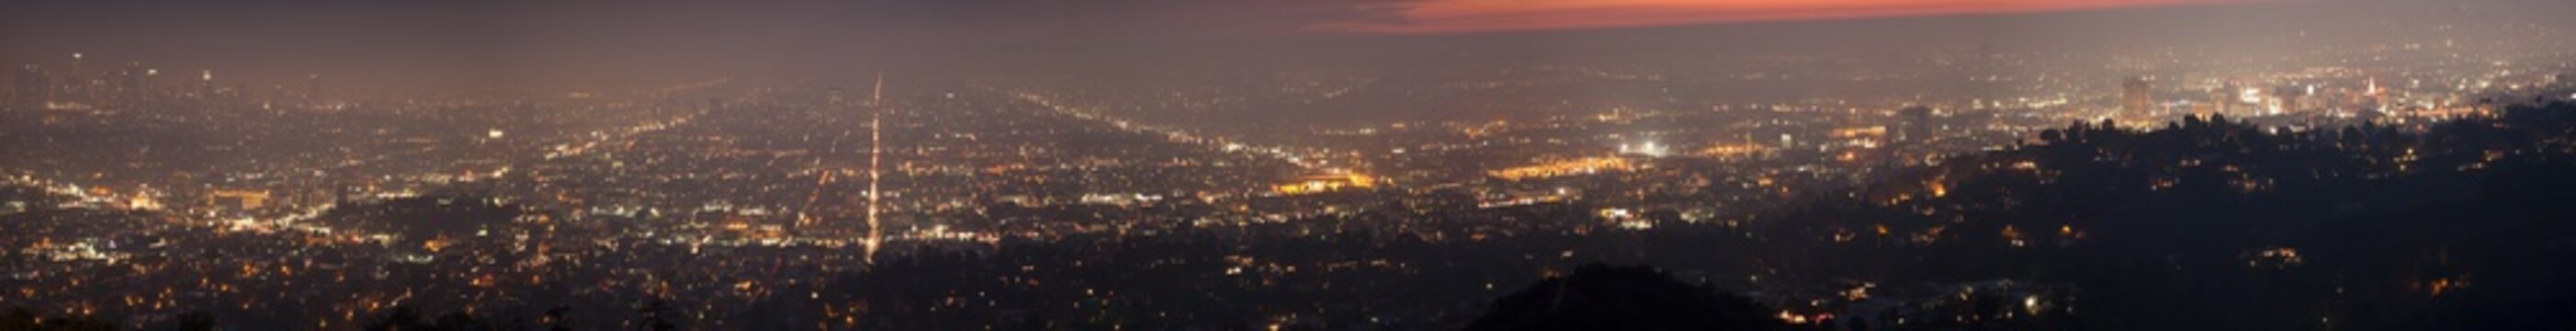 Night skyline of Los Angels viewed from Griffith Observatory in panorama.